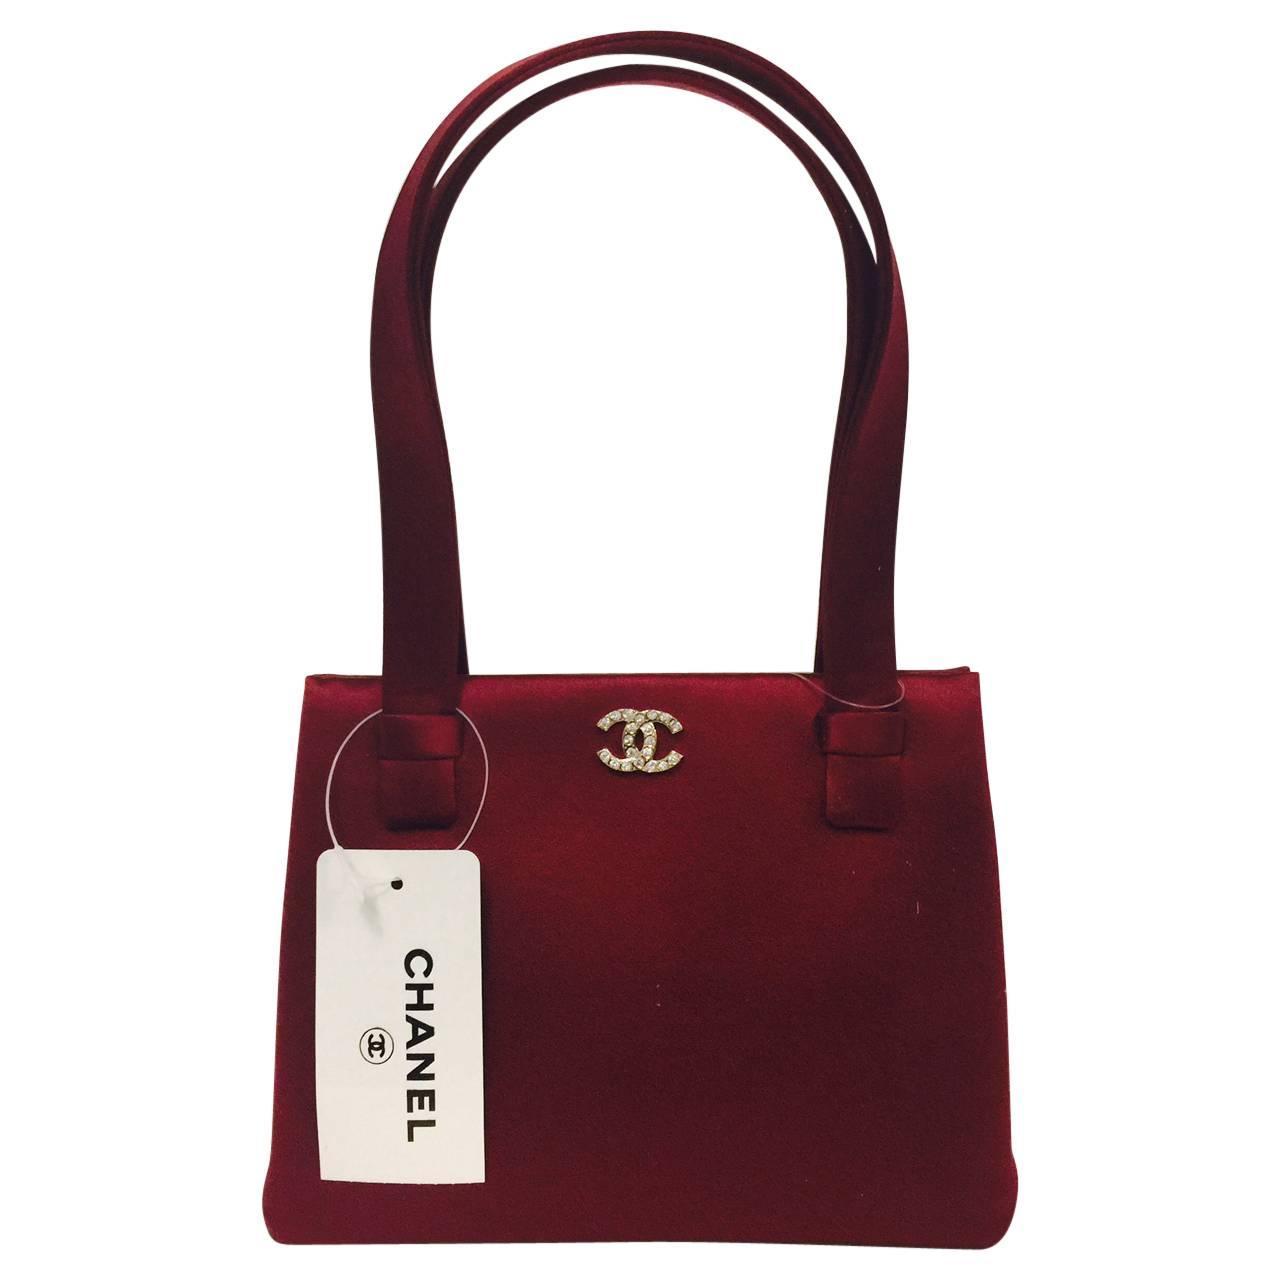 1990s Chanel Bordeaux Silk Evening Handbag From Neiman Marcus NWT Serial 5706549 For Sale at 1stdibs